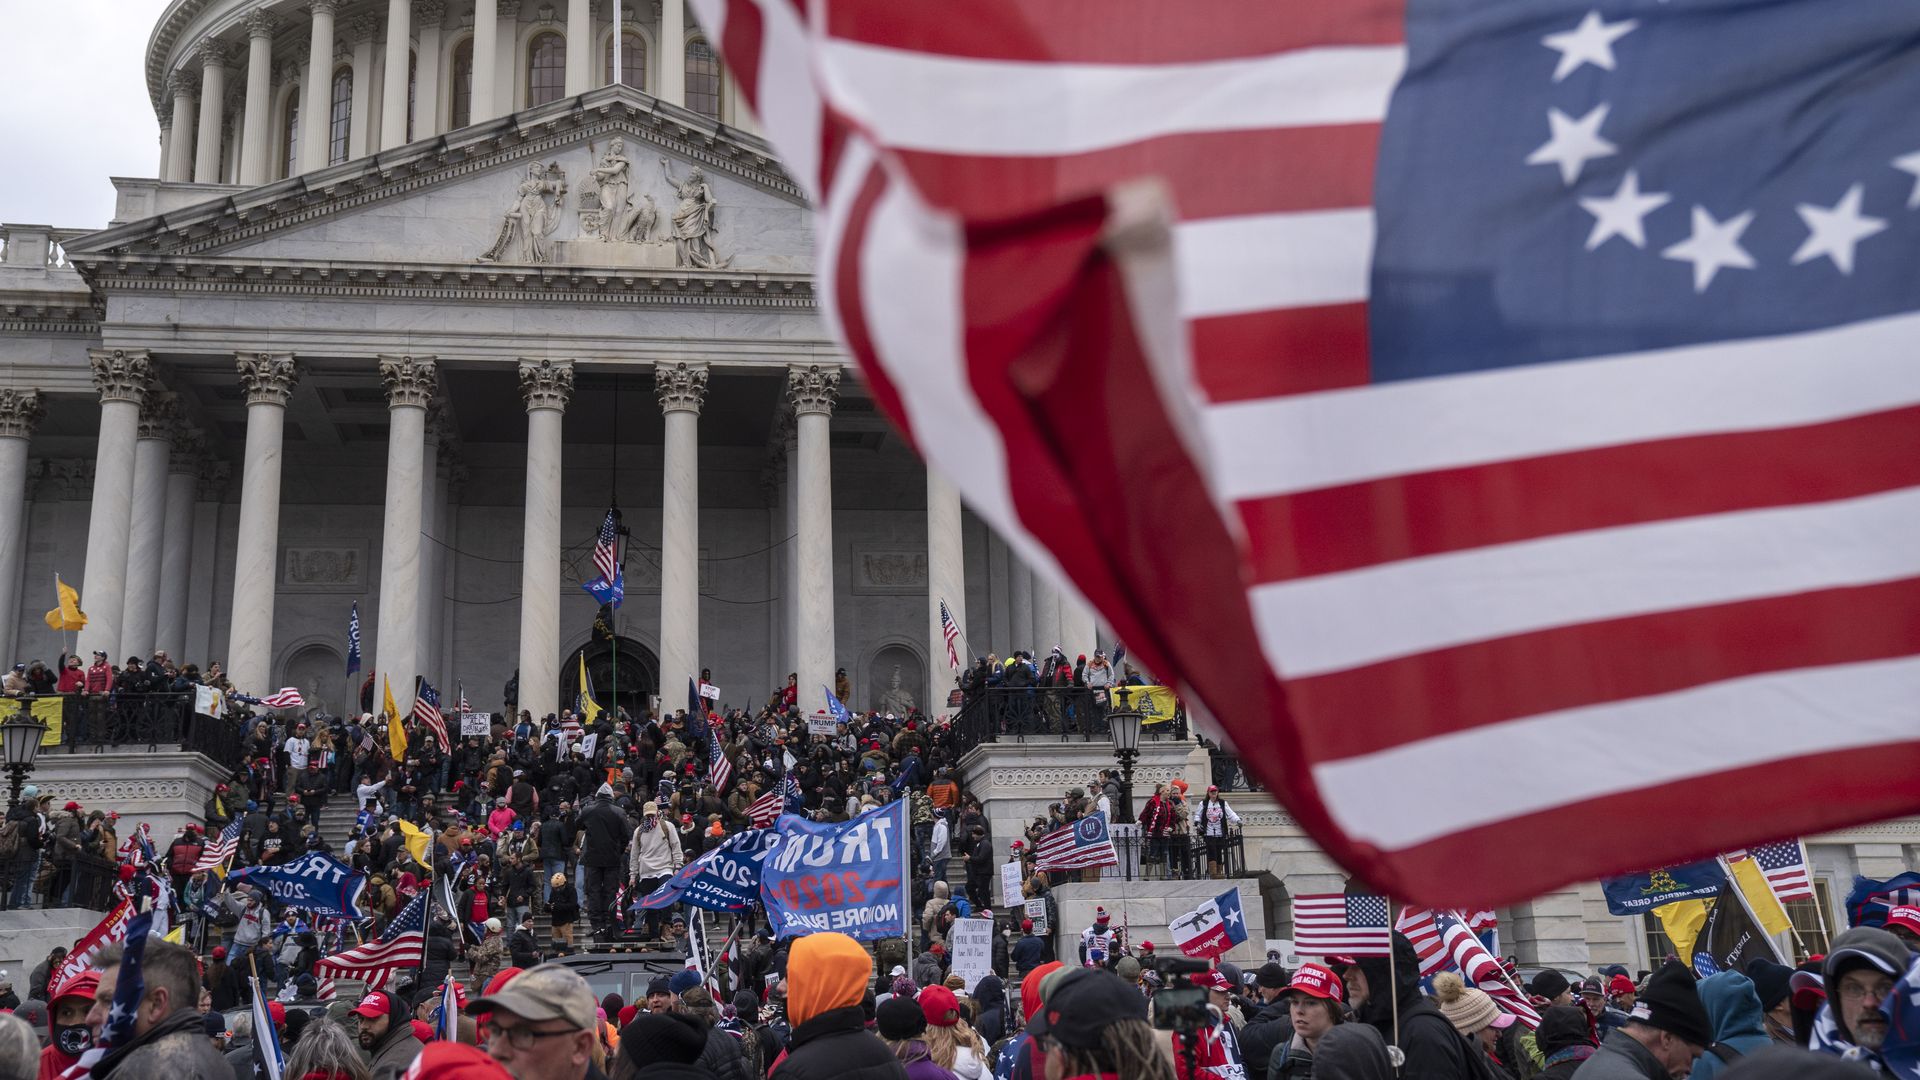 Photo of Trump supporters crowded onto the U.S. Capitol as an American flag flies in the foreground